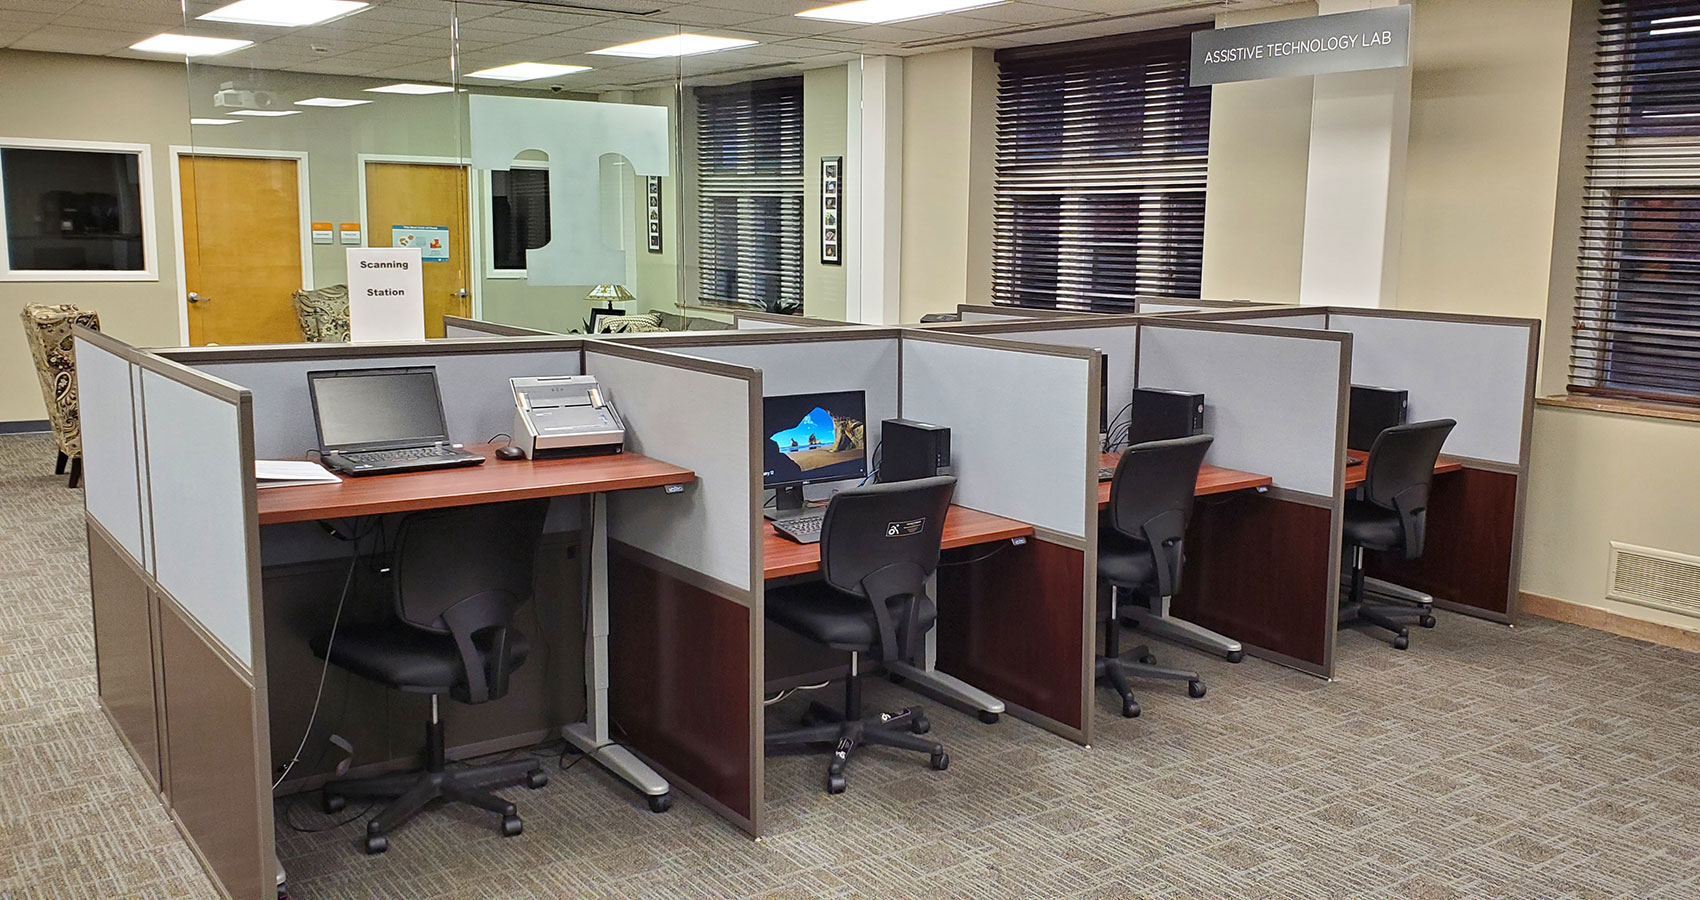 Four stations in the assistive technology lab equipped with computers and adjustable desks